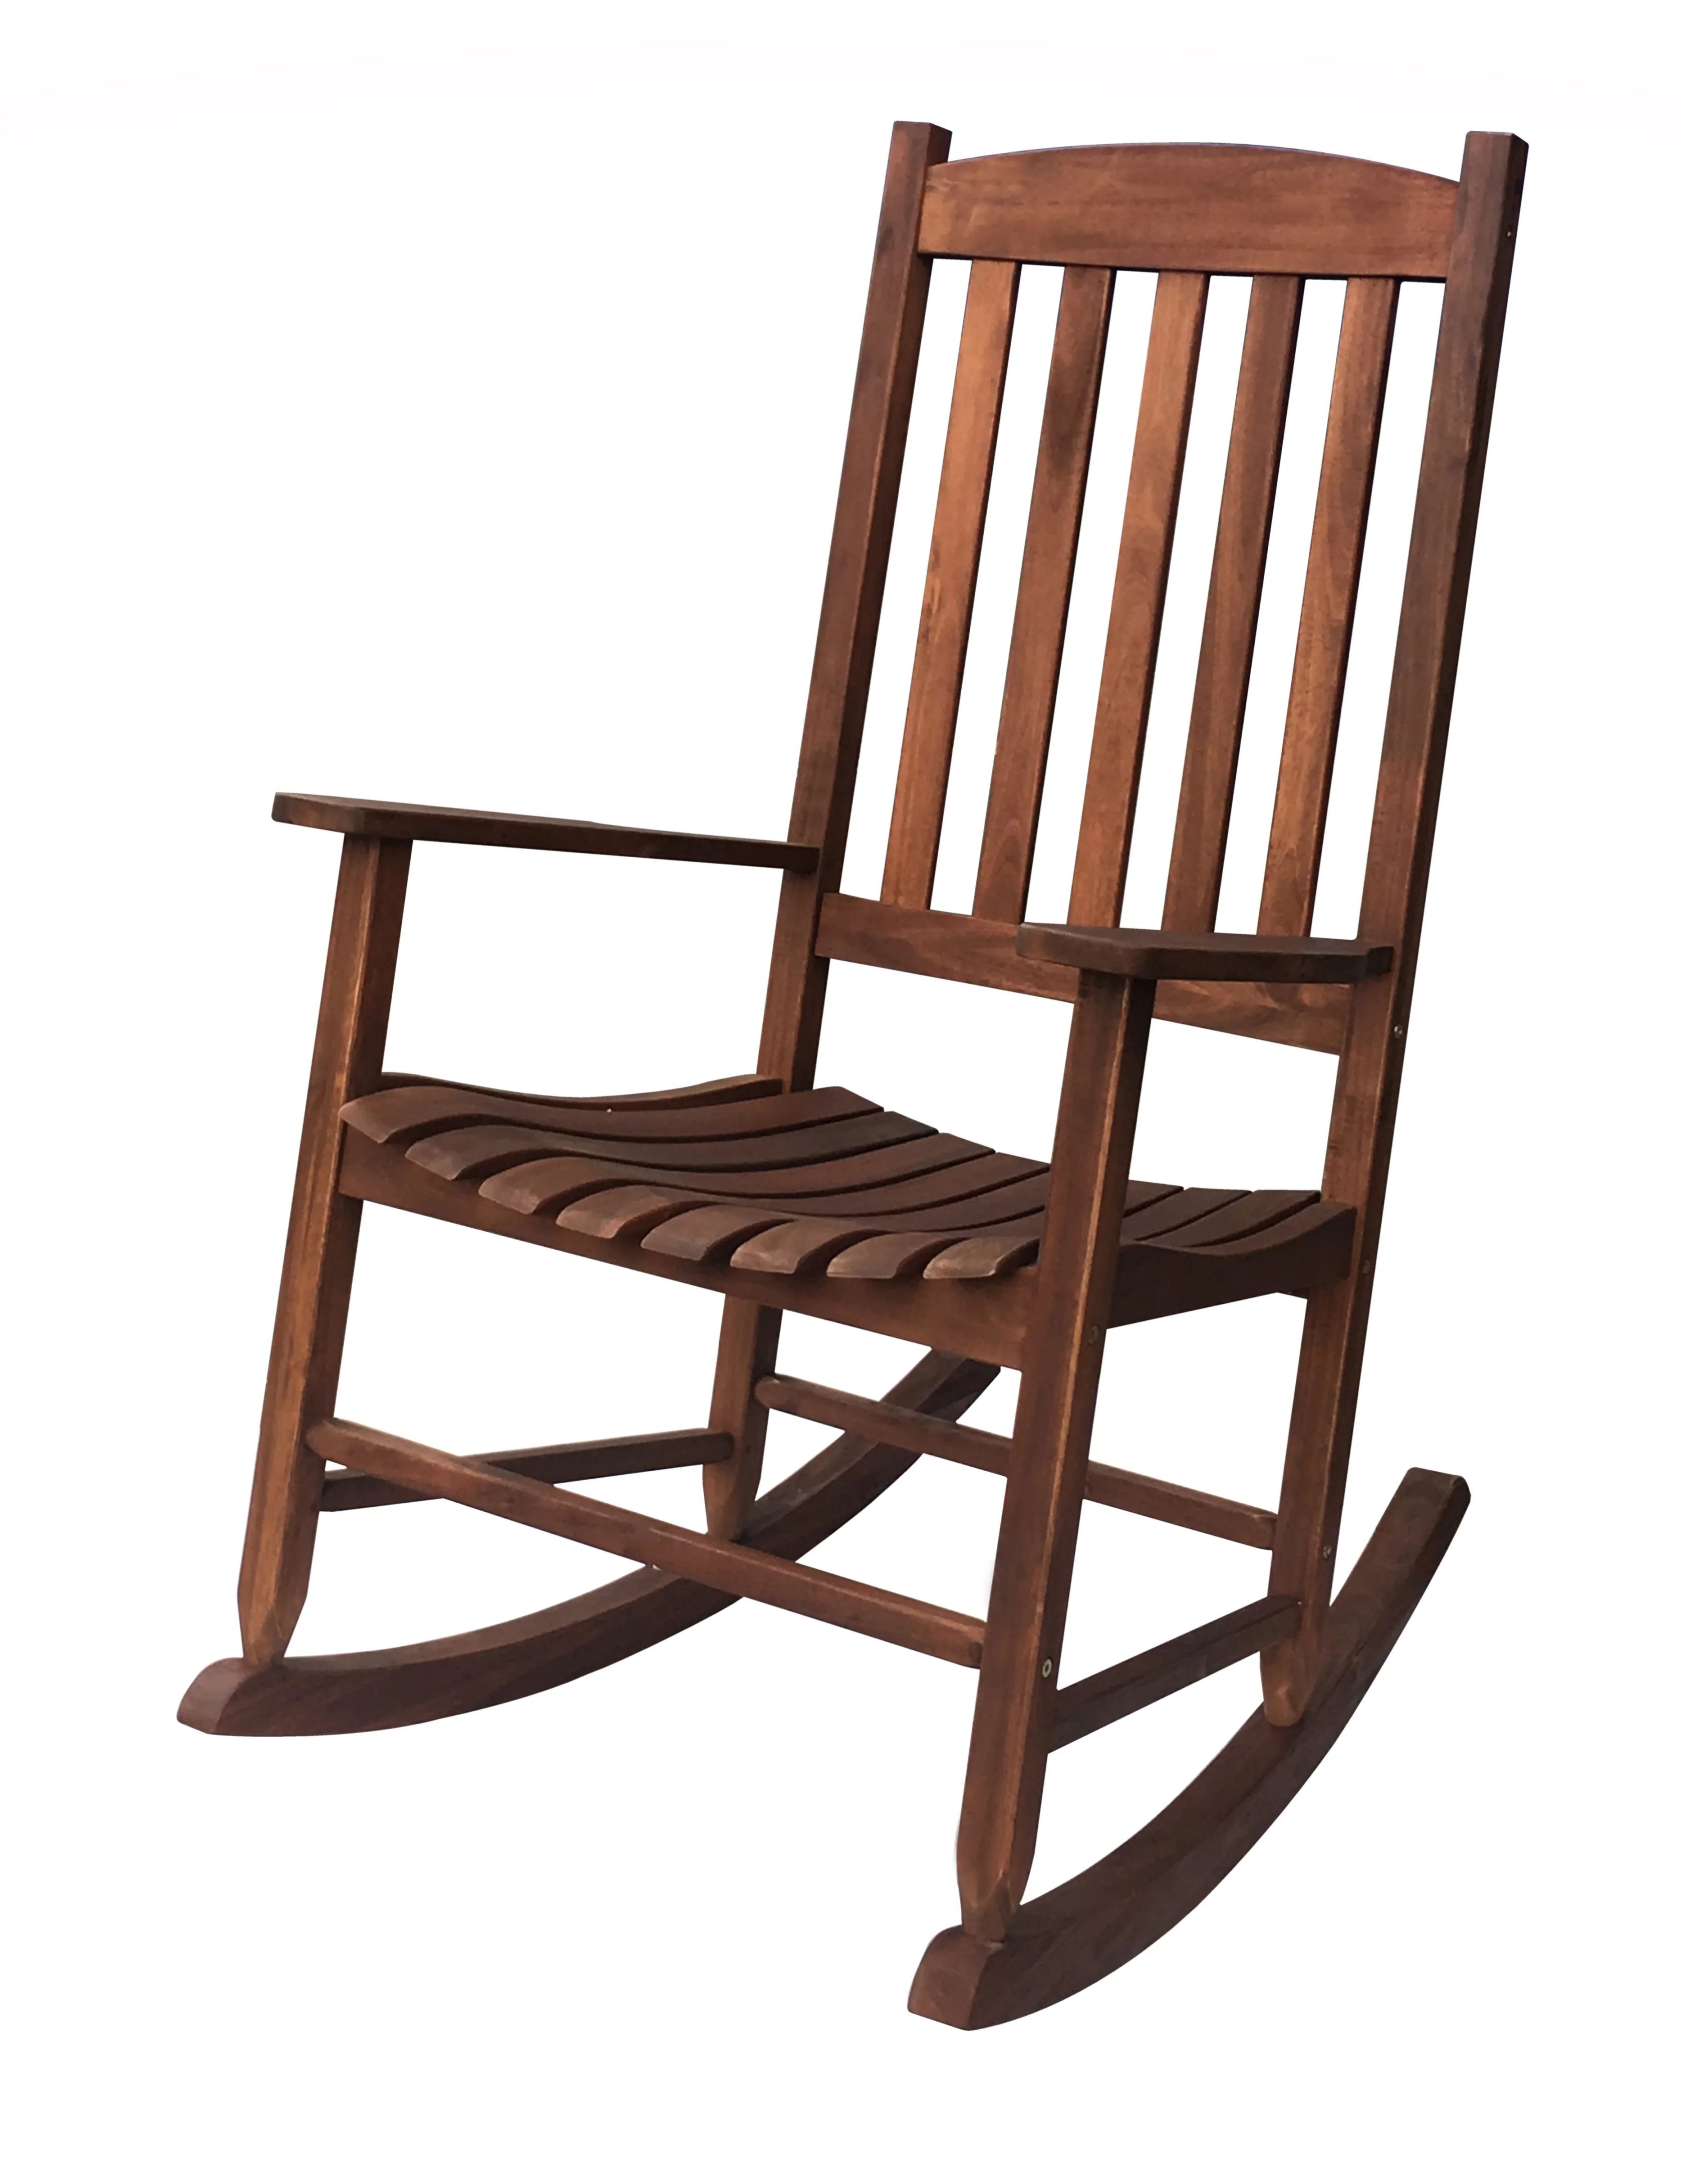 Mainstays Outdoor Wood Porch Rocking Chair, Dark Brown Color, Weather Resistant Finish | Walmart (US)